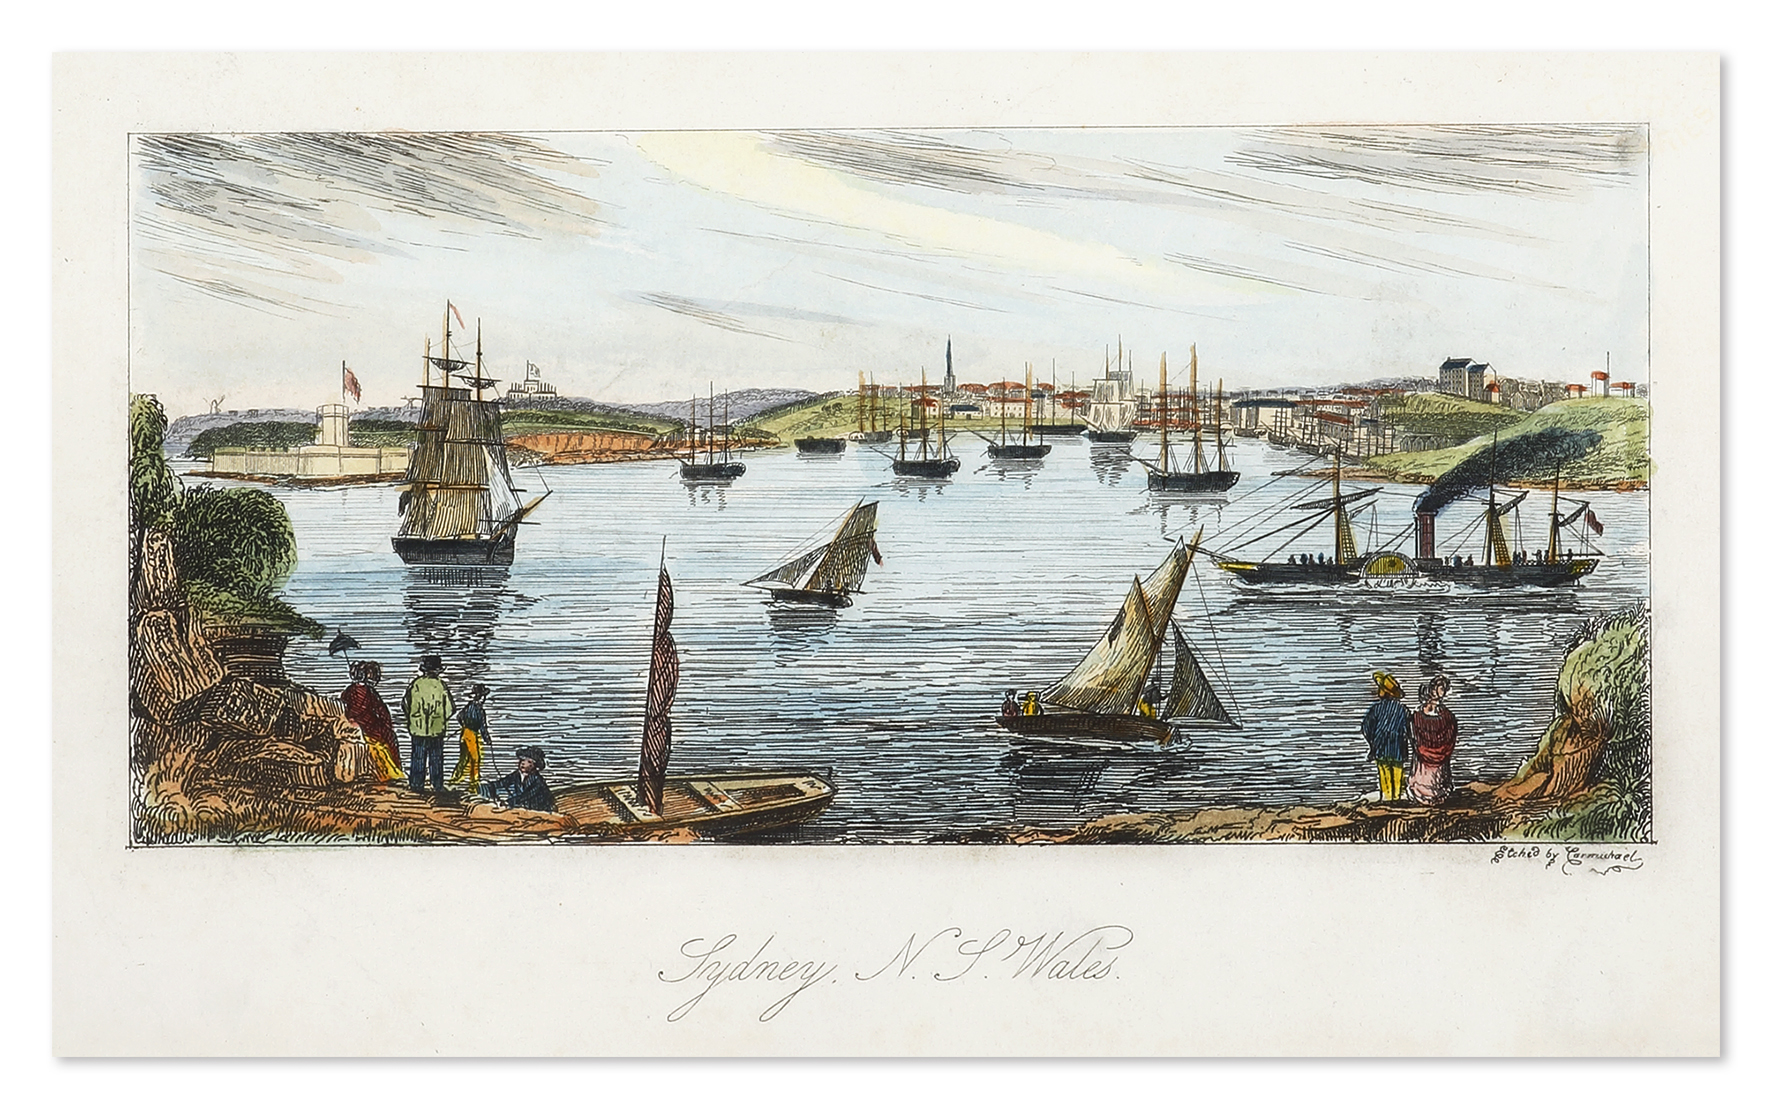 Sydney, N.S. Wales - Antique Print from 1848